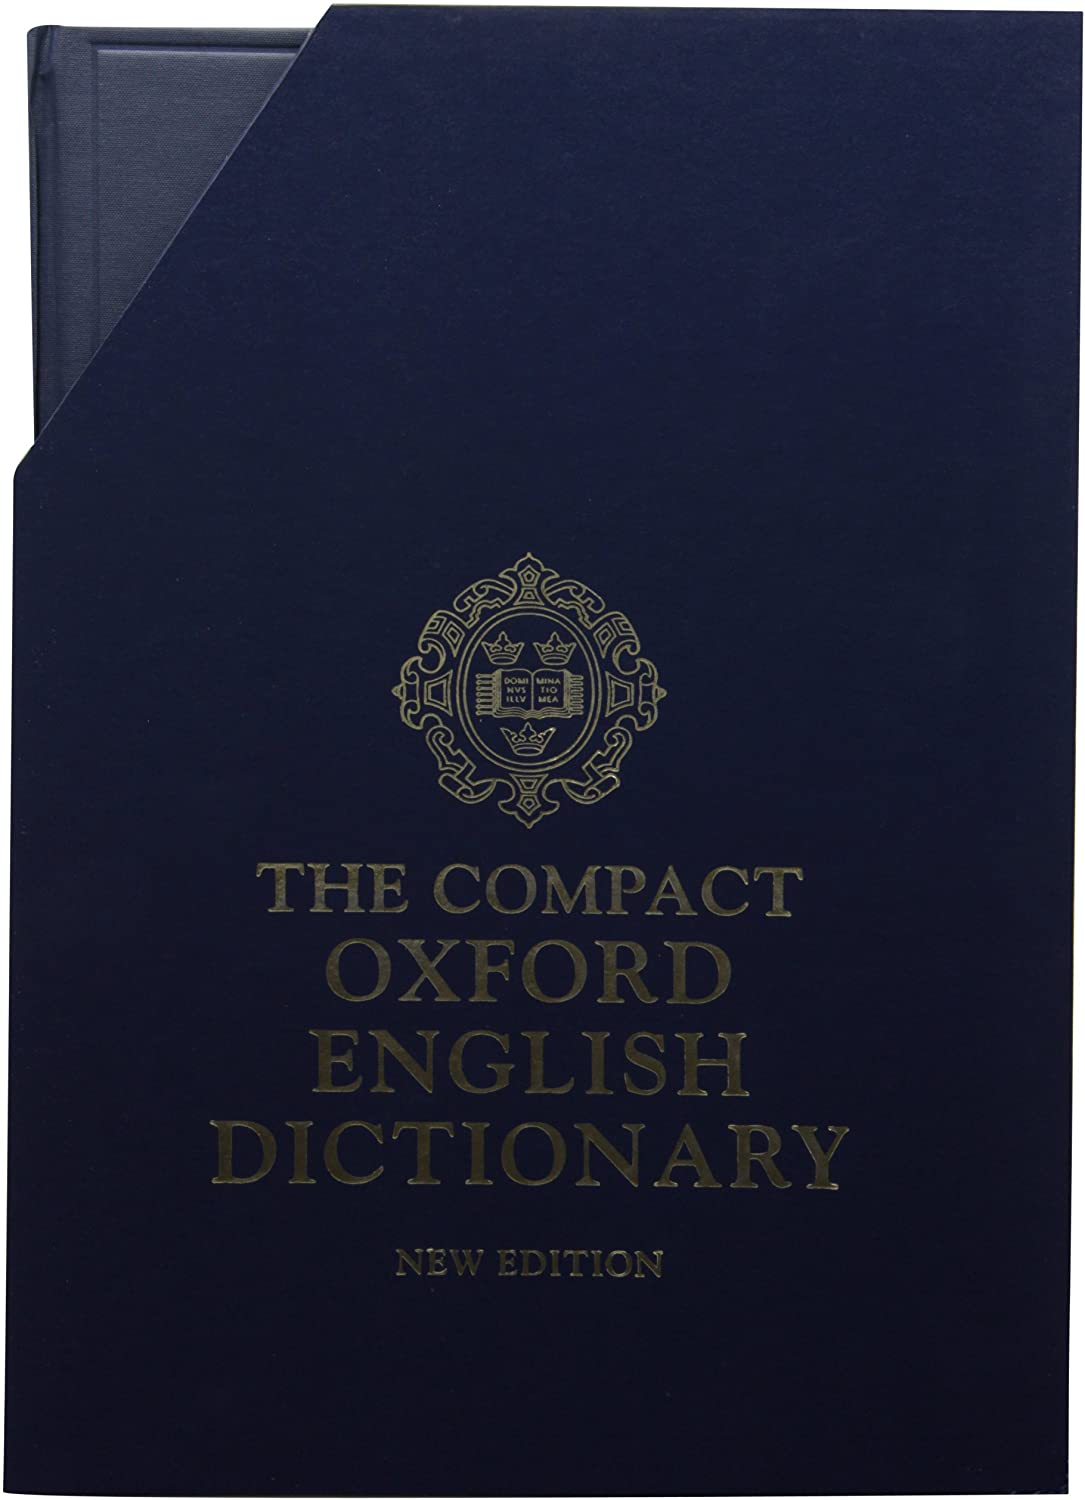 The Compact Edition of The Oxford English Dictionary, Complete Text Reproduced Micrographically (in slipcase with reading glass)